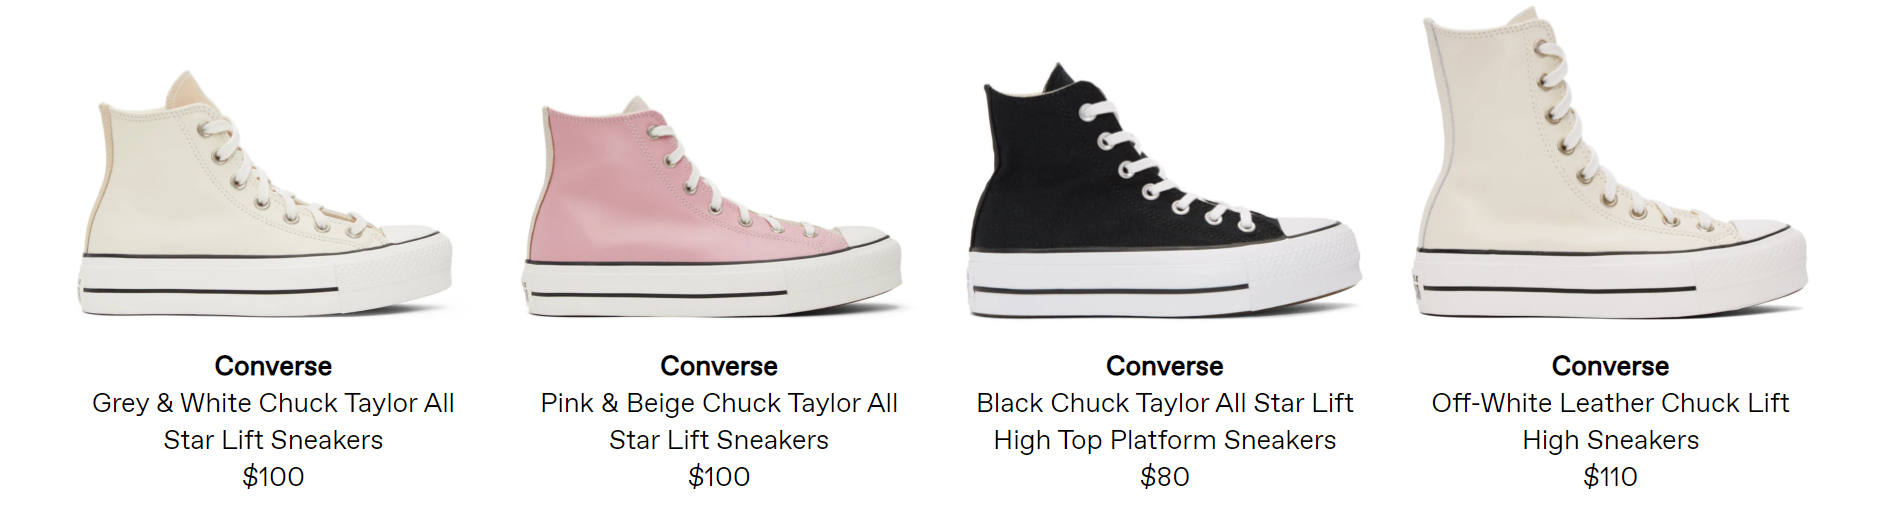 converse-on-the-new-good-looking-not-expensive-from-55-ice-cream-color-2020-9-1